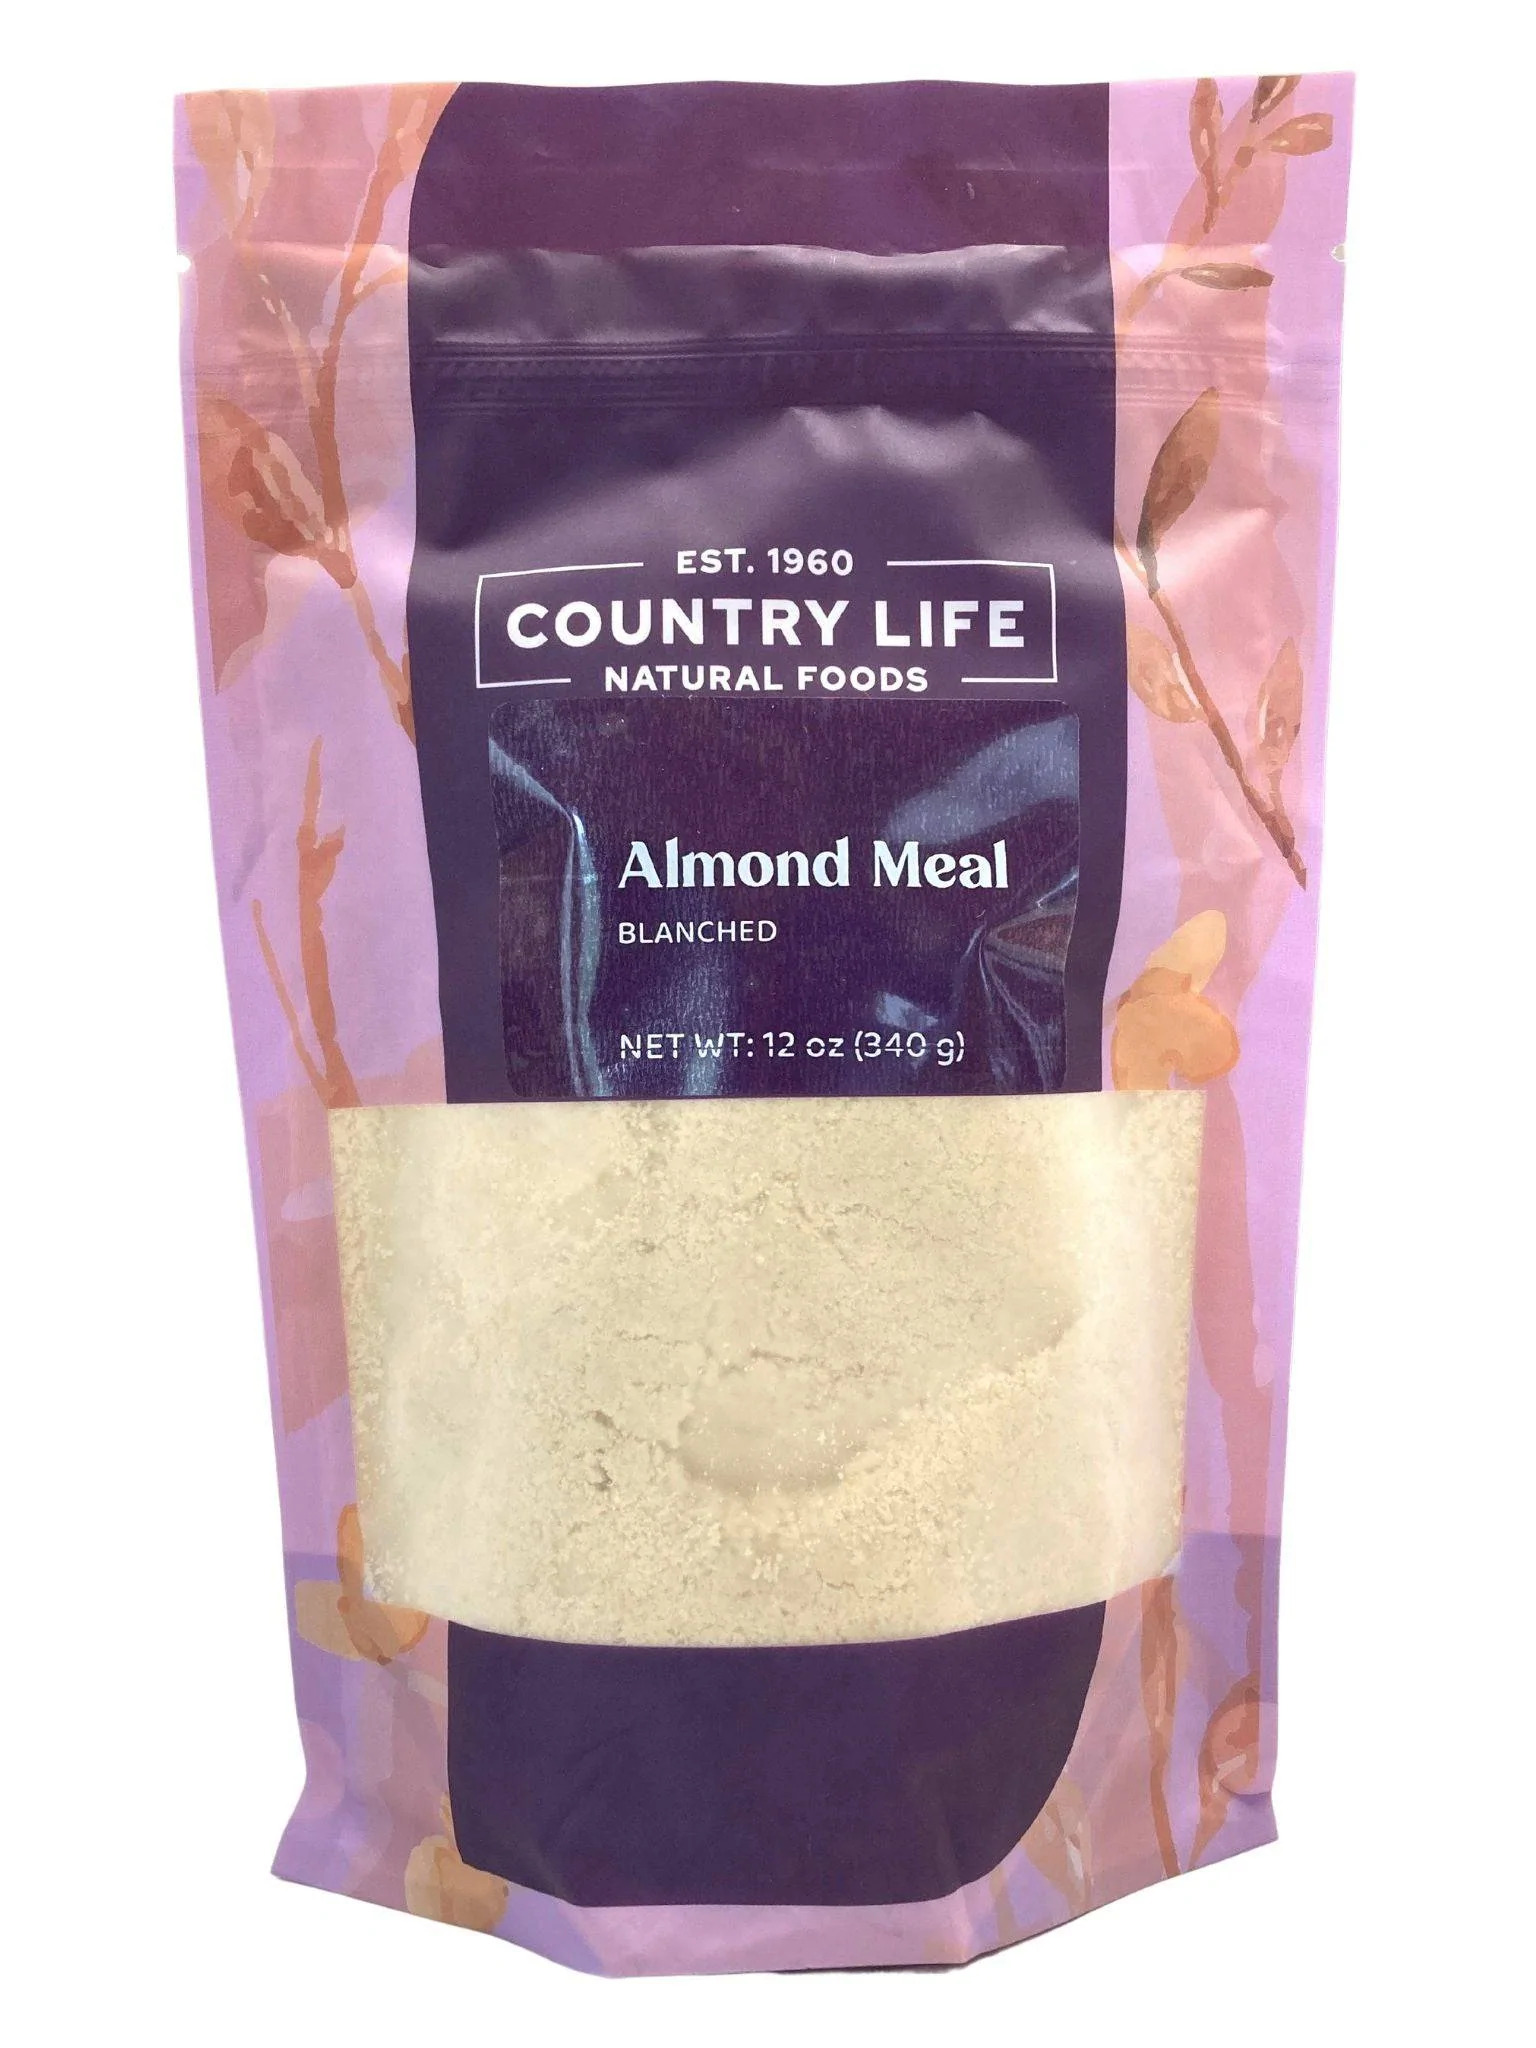 BLANCHED ALMOND MEAL